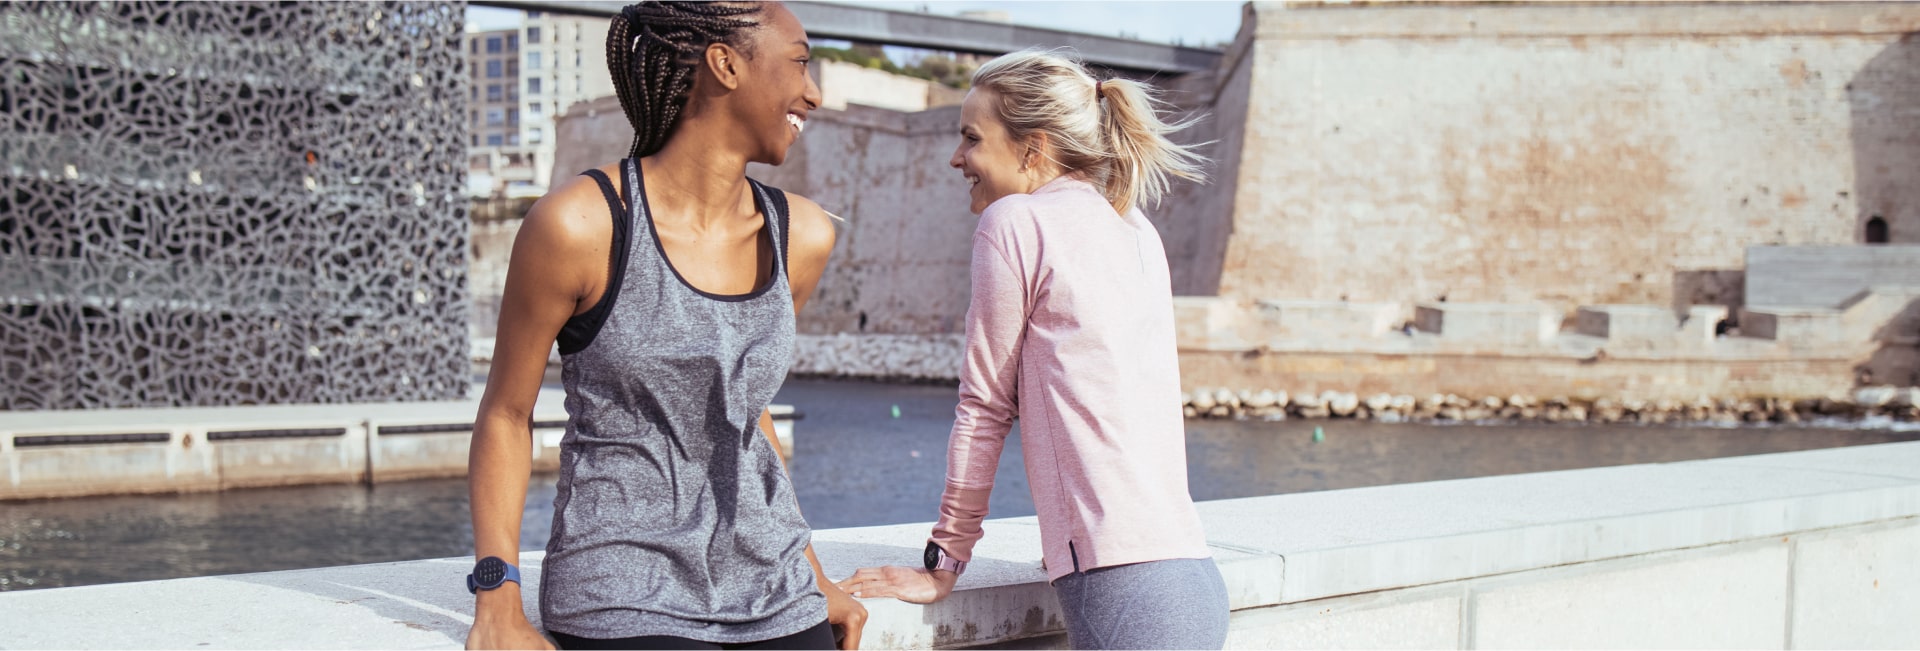 HOW EXERCISING WITH OTHERS ENHANCES YOUR SOCIAL HEALTH